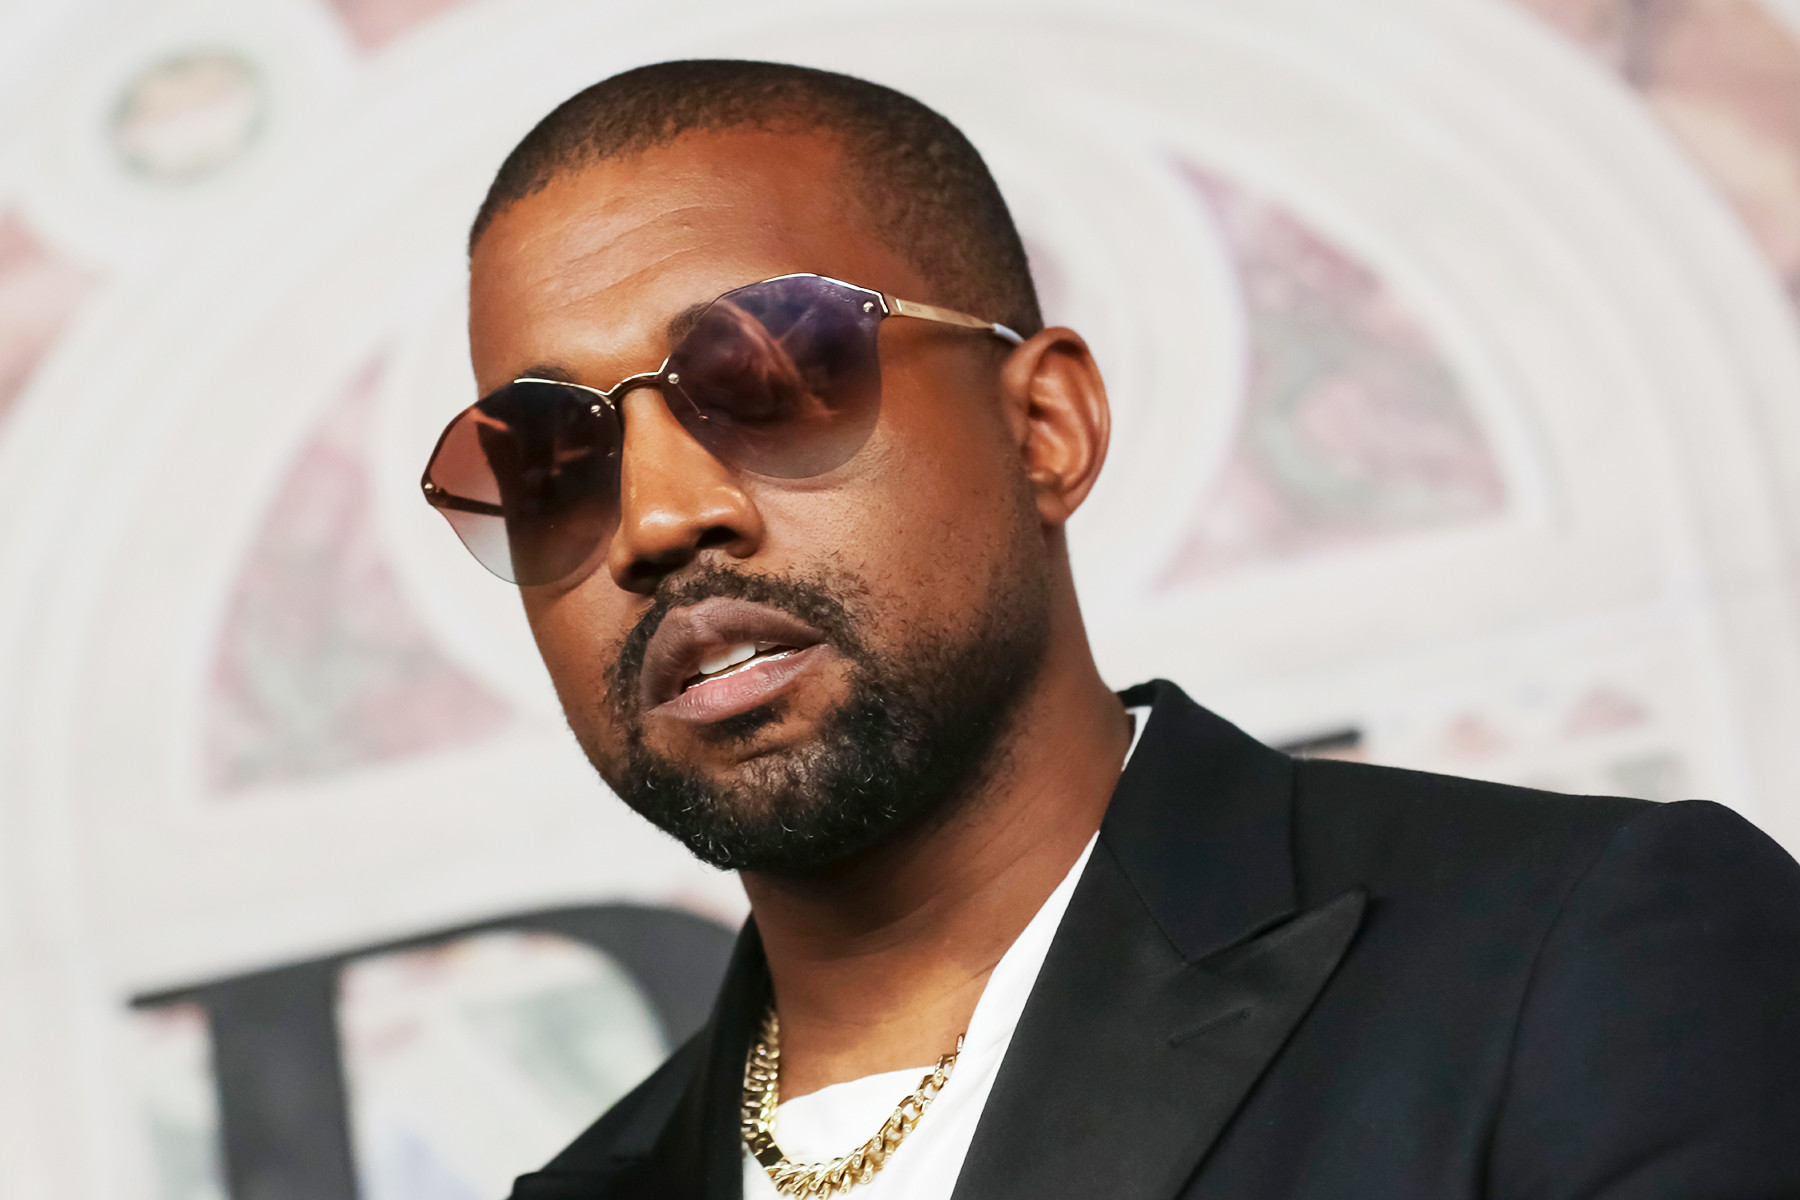 WCSC – SC family suing Kanye West for copyright infringement in Charleston federal court